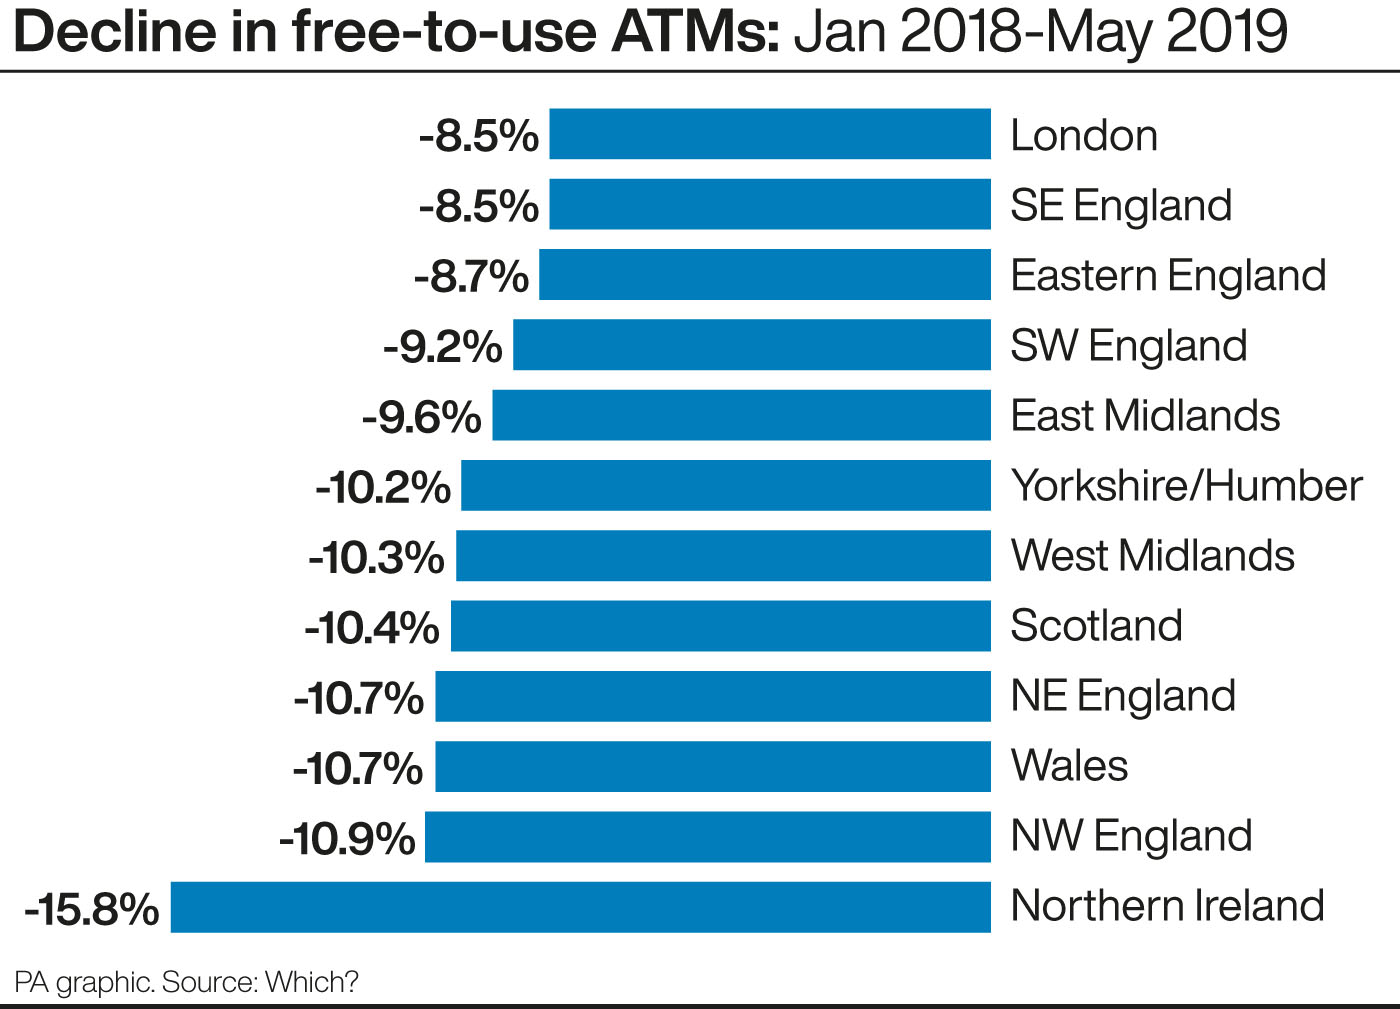 Decline in free-to-use ATMs: Jan 2018-May 2019.